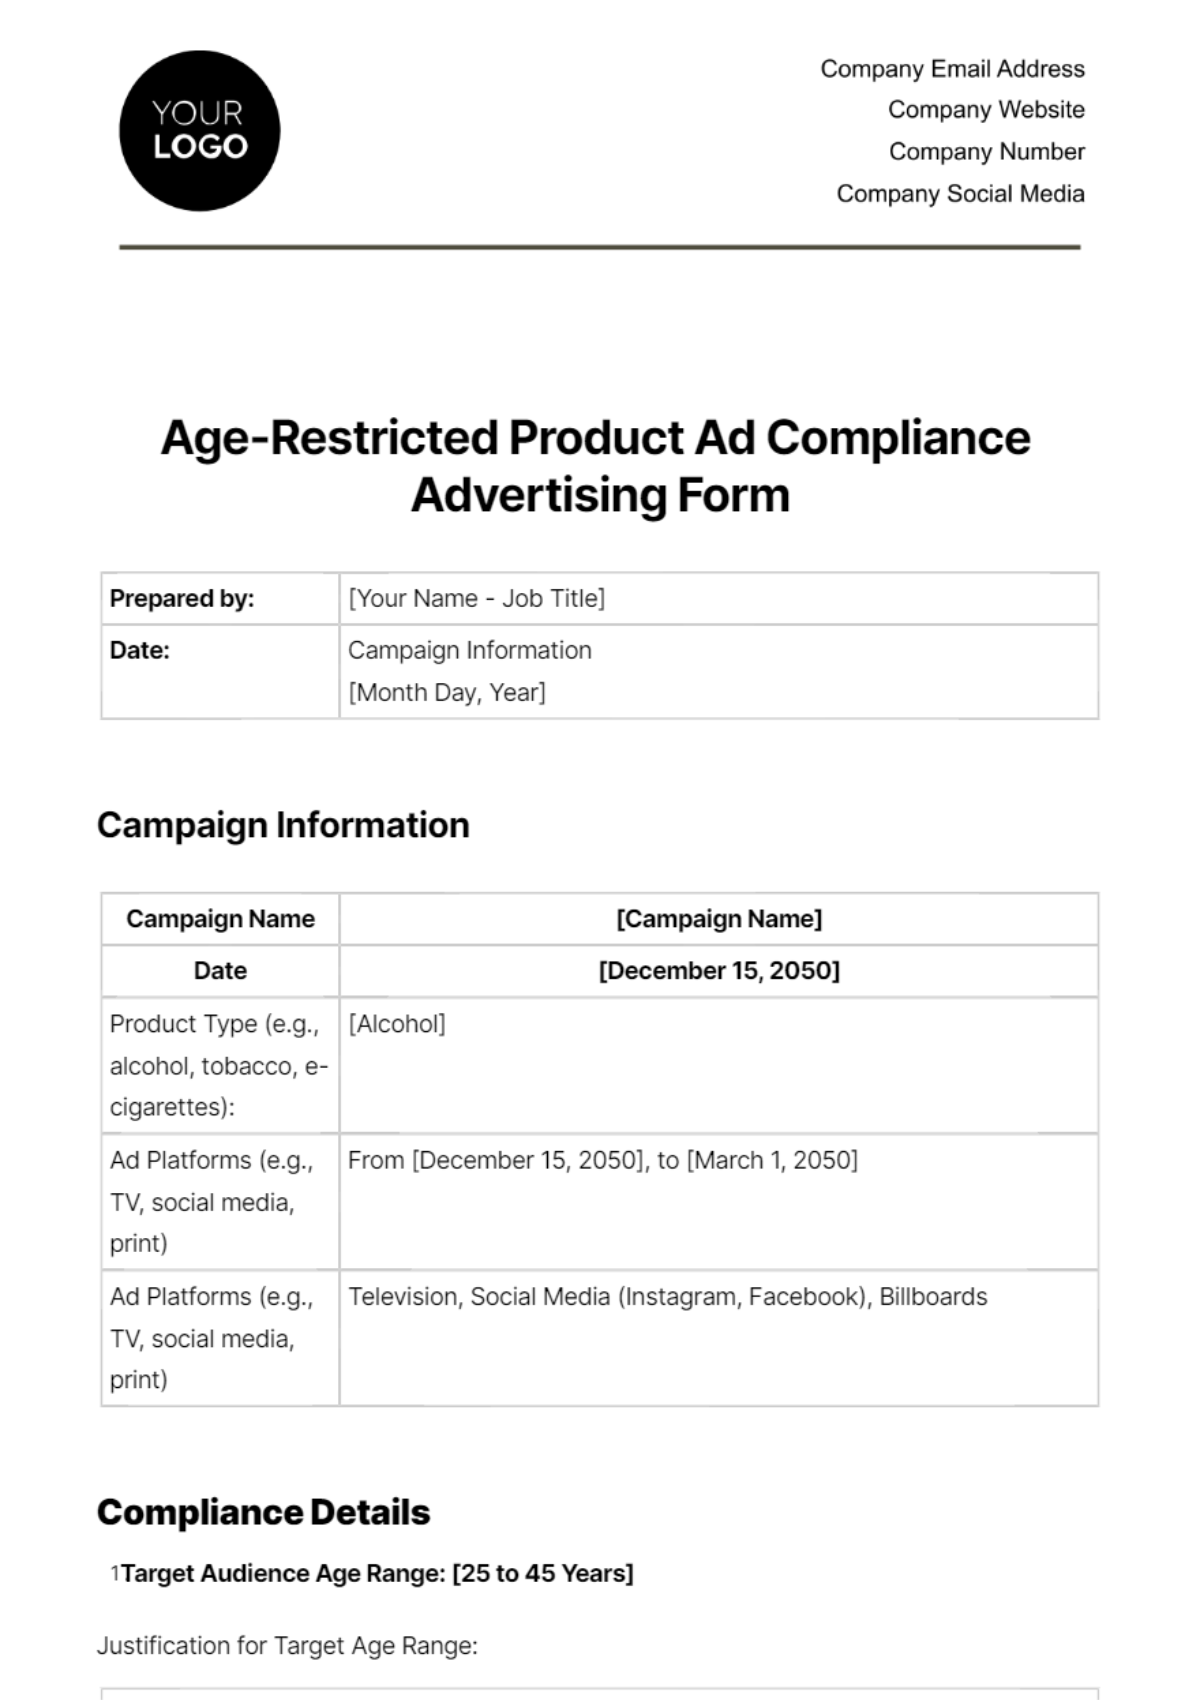 Age-Restricted Product Ad Compliance Advertising Form Template